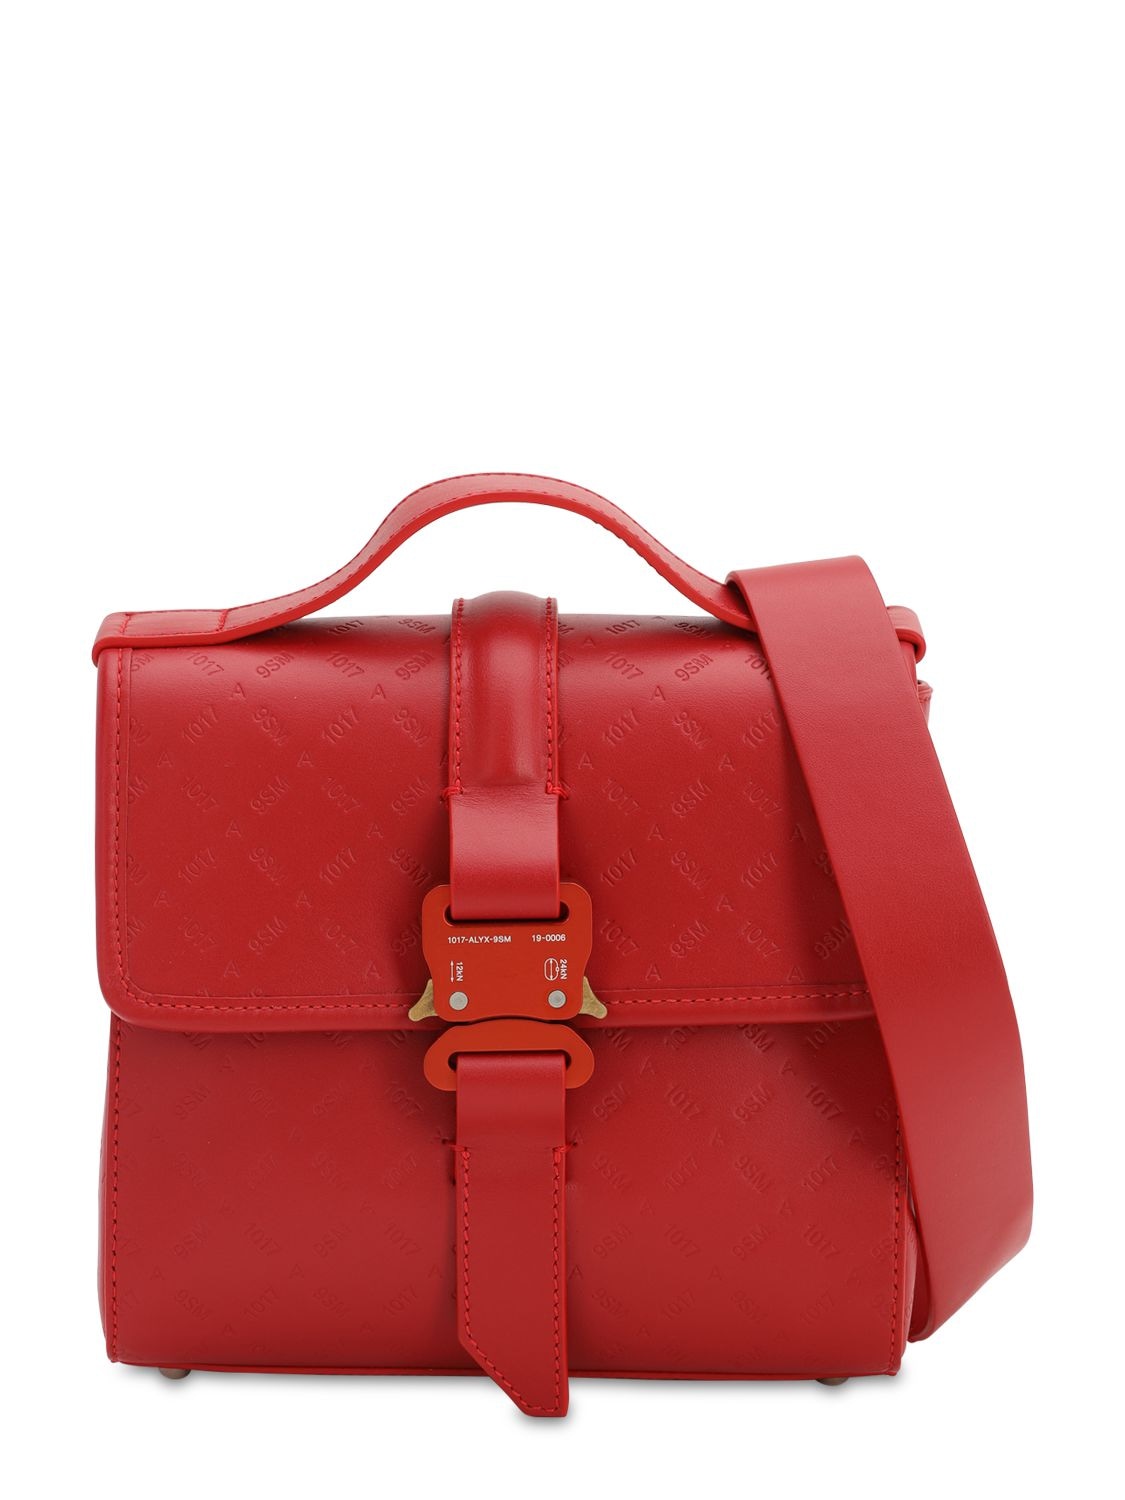 Alyx Anna Leather Bag In Red Cherry